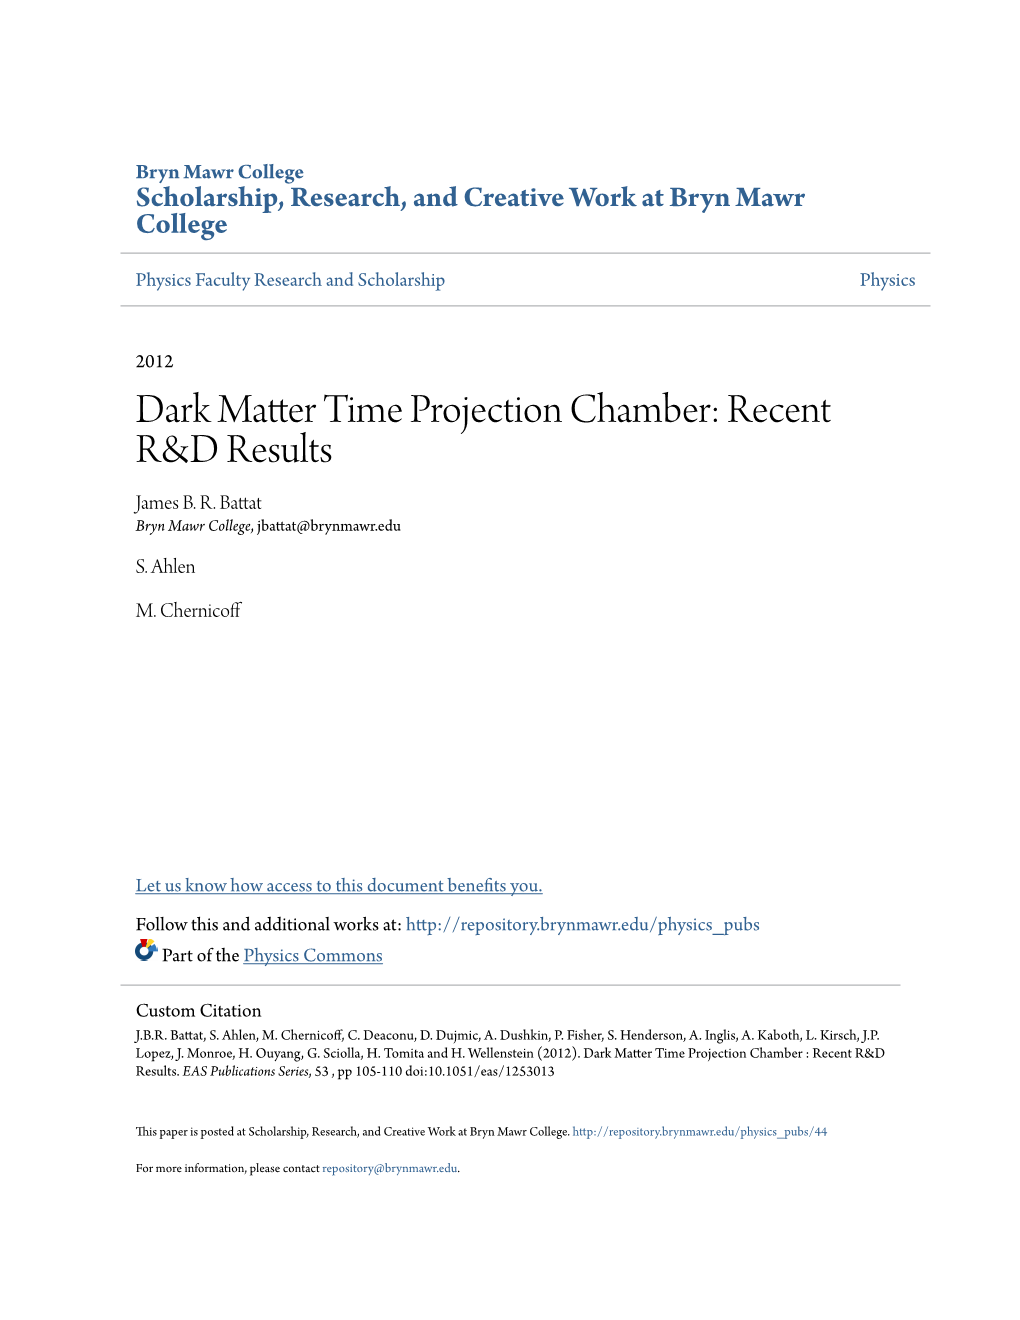 Dark Matter Time Projection Chamber: Recent R&D Results James B